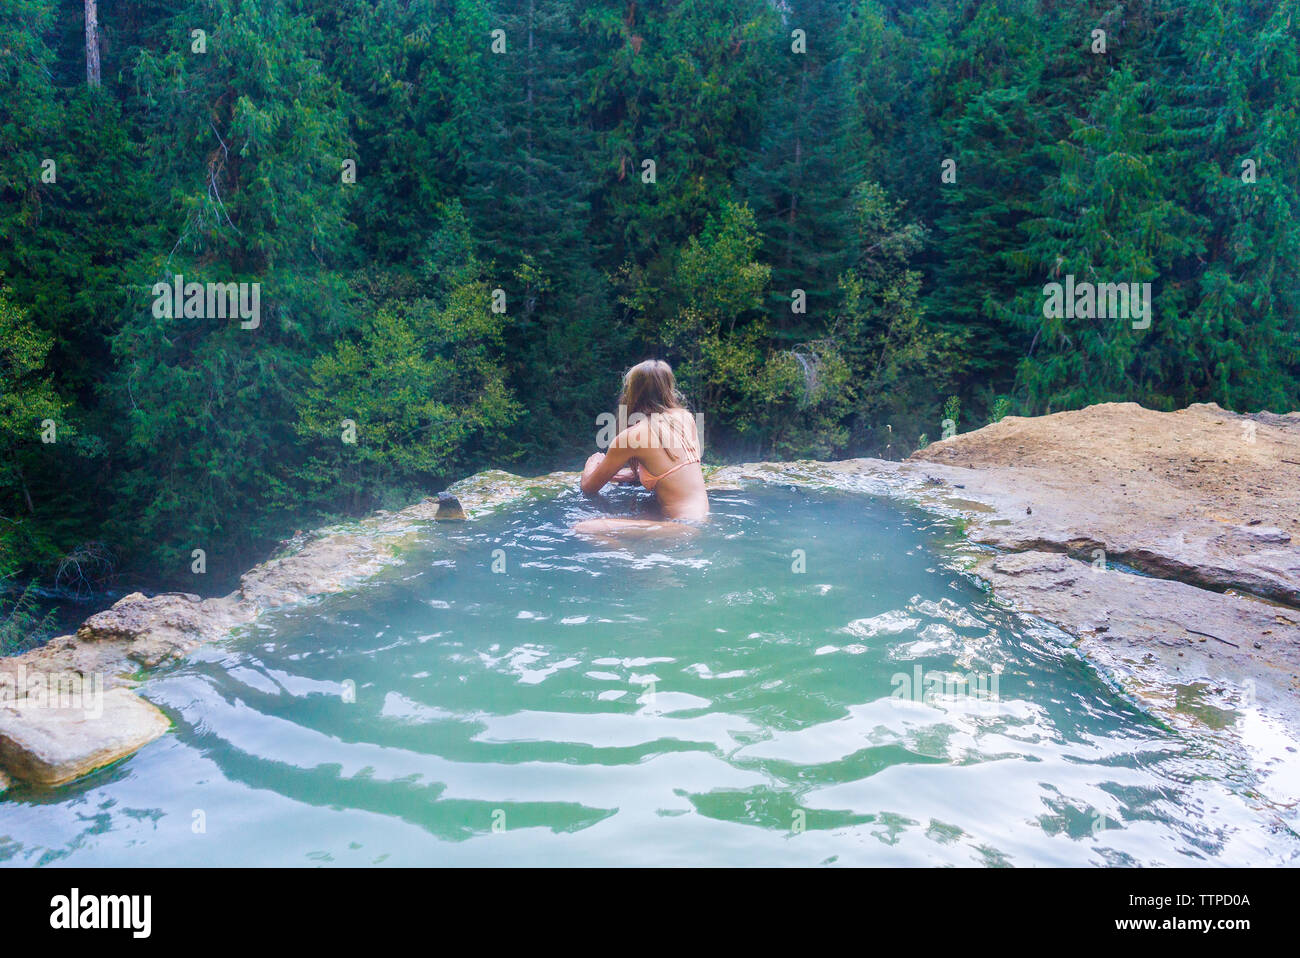 Woman swimming in hot spring at forest Stock Photo